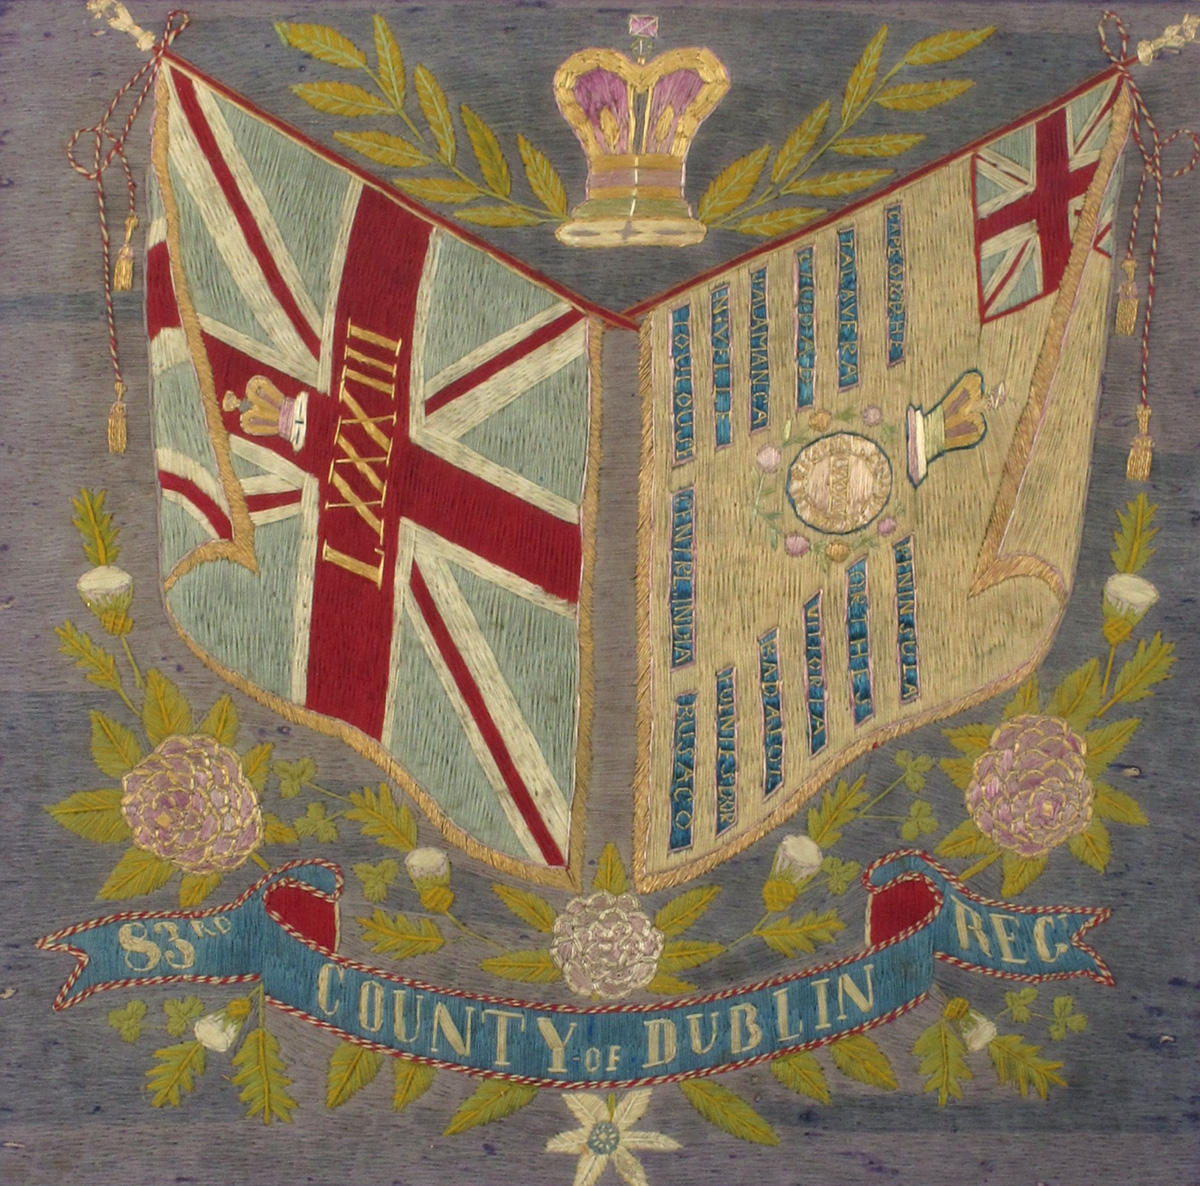 Circa 1830, 83rd County of Dublin Regiment, needlework panel. at Whyte's Auctions